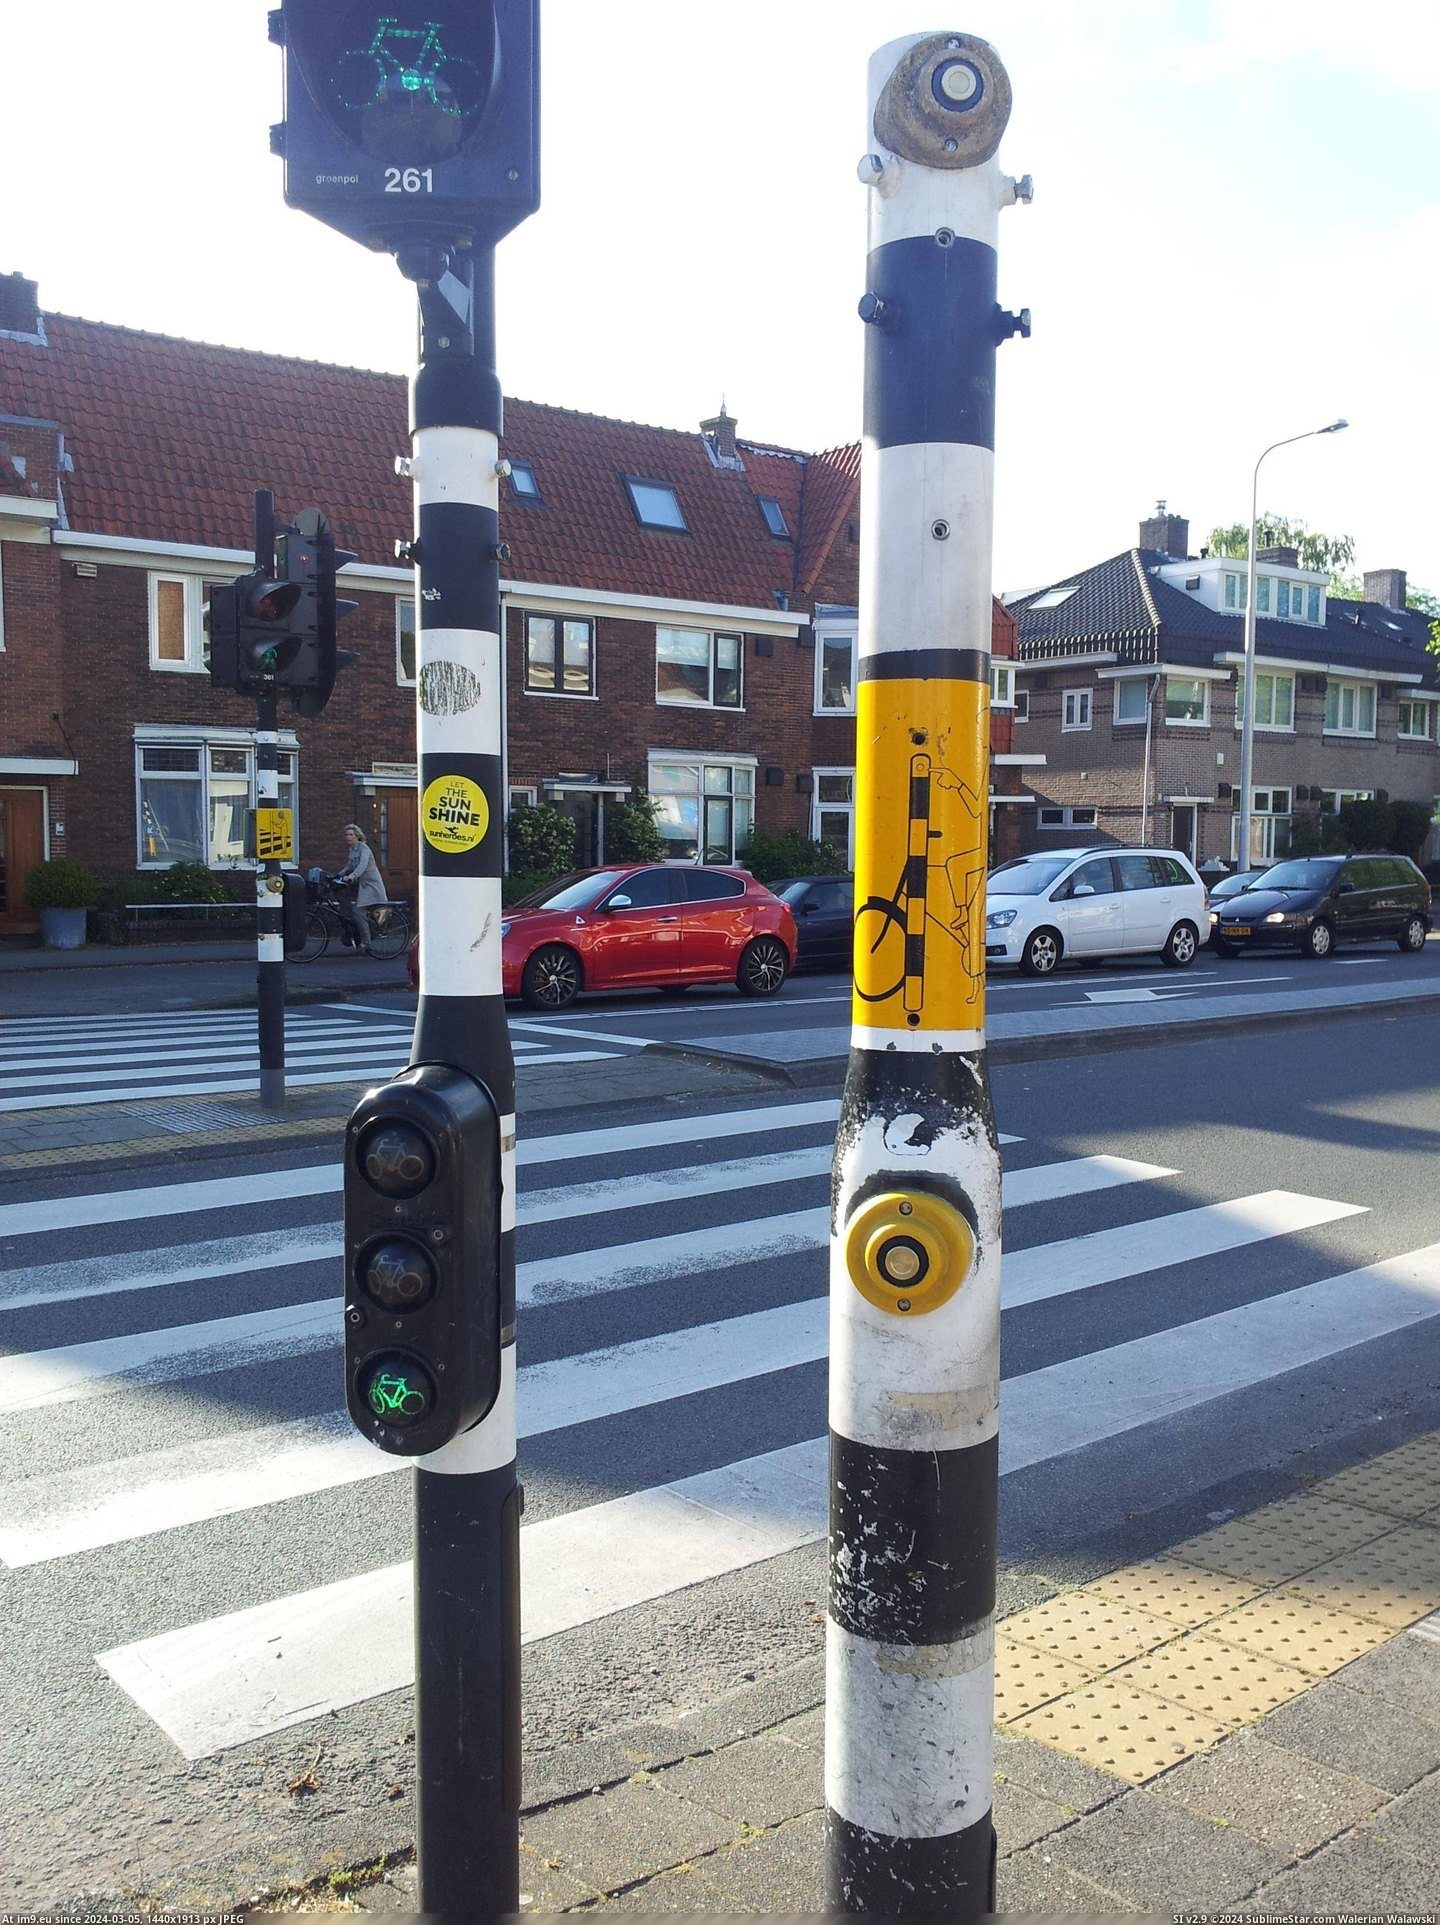 #High #Light #Button #Bicycle #Extra #Traffic [Mildlyinteresting] This bicycle traffic light has an extra high button Pic. (Изображение из альбом My r/MILDLYINTERESTING favs))